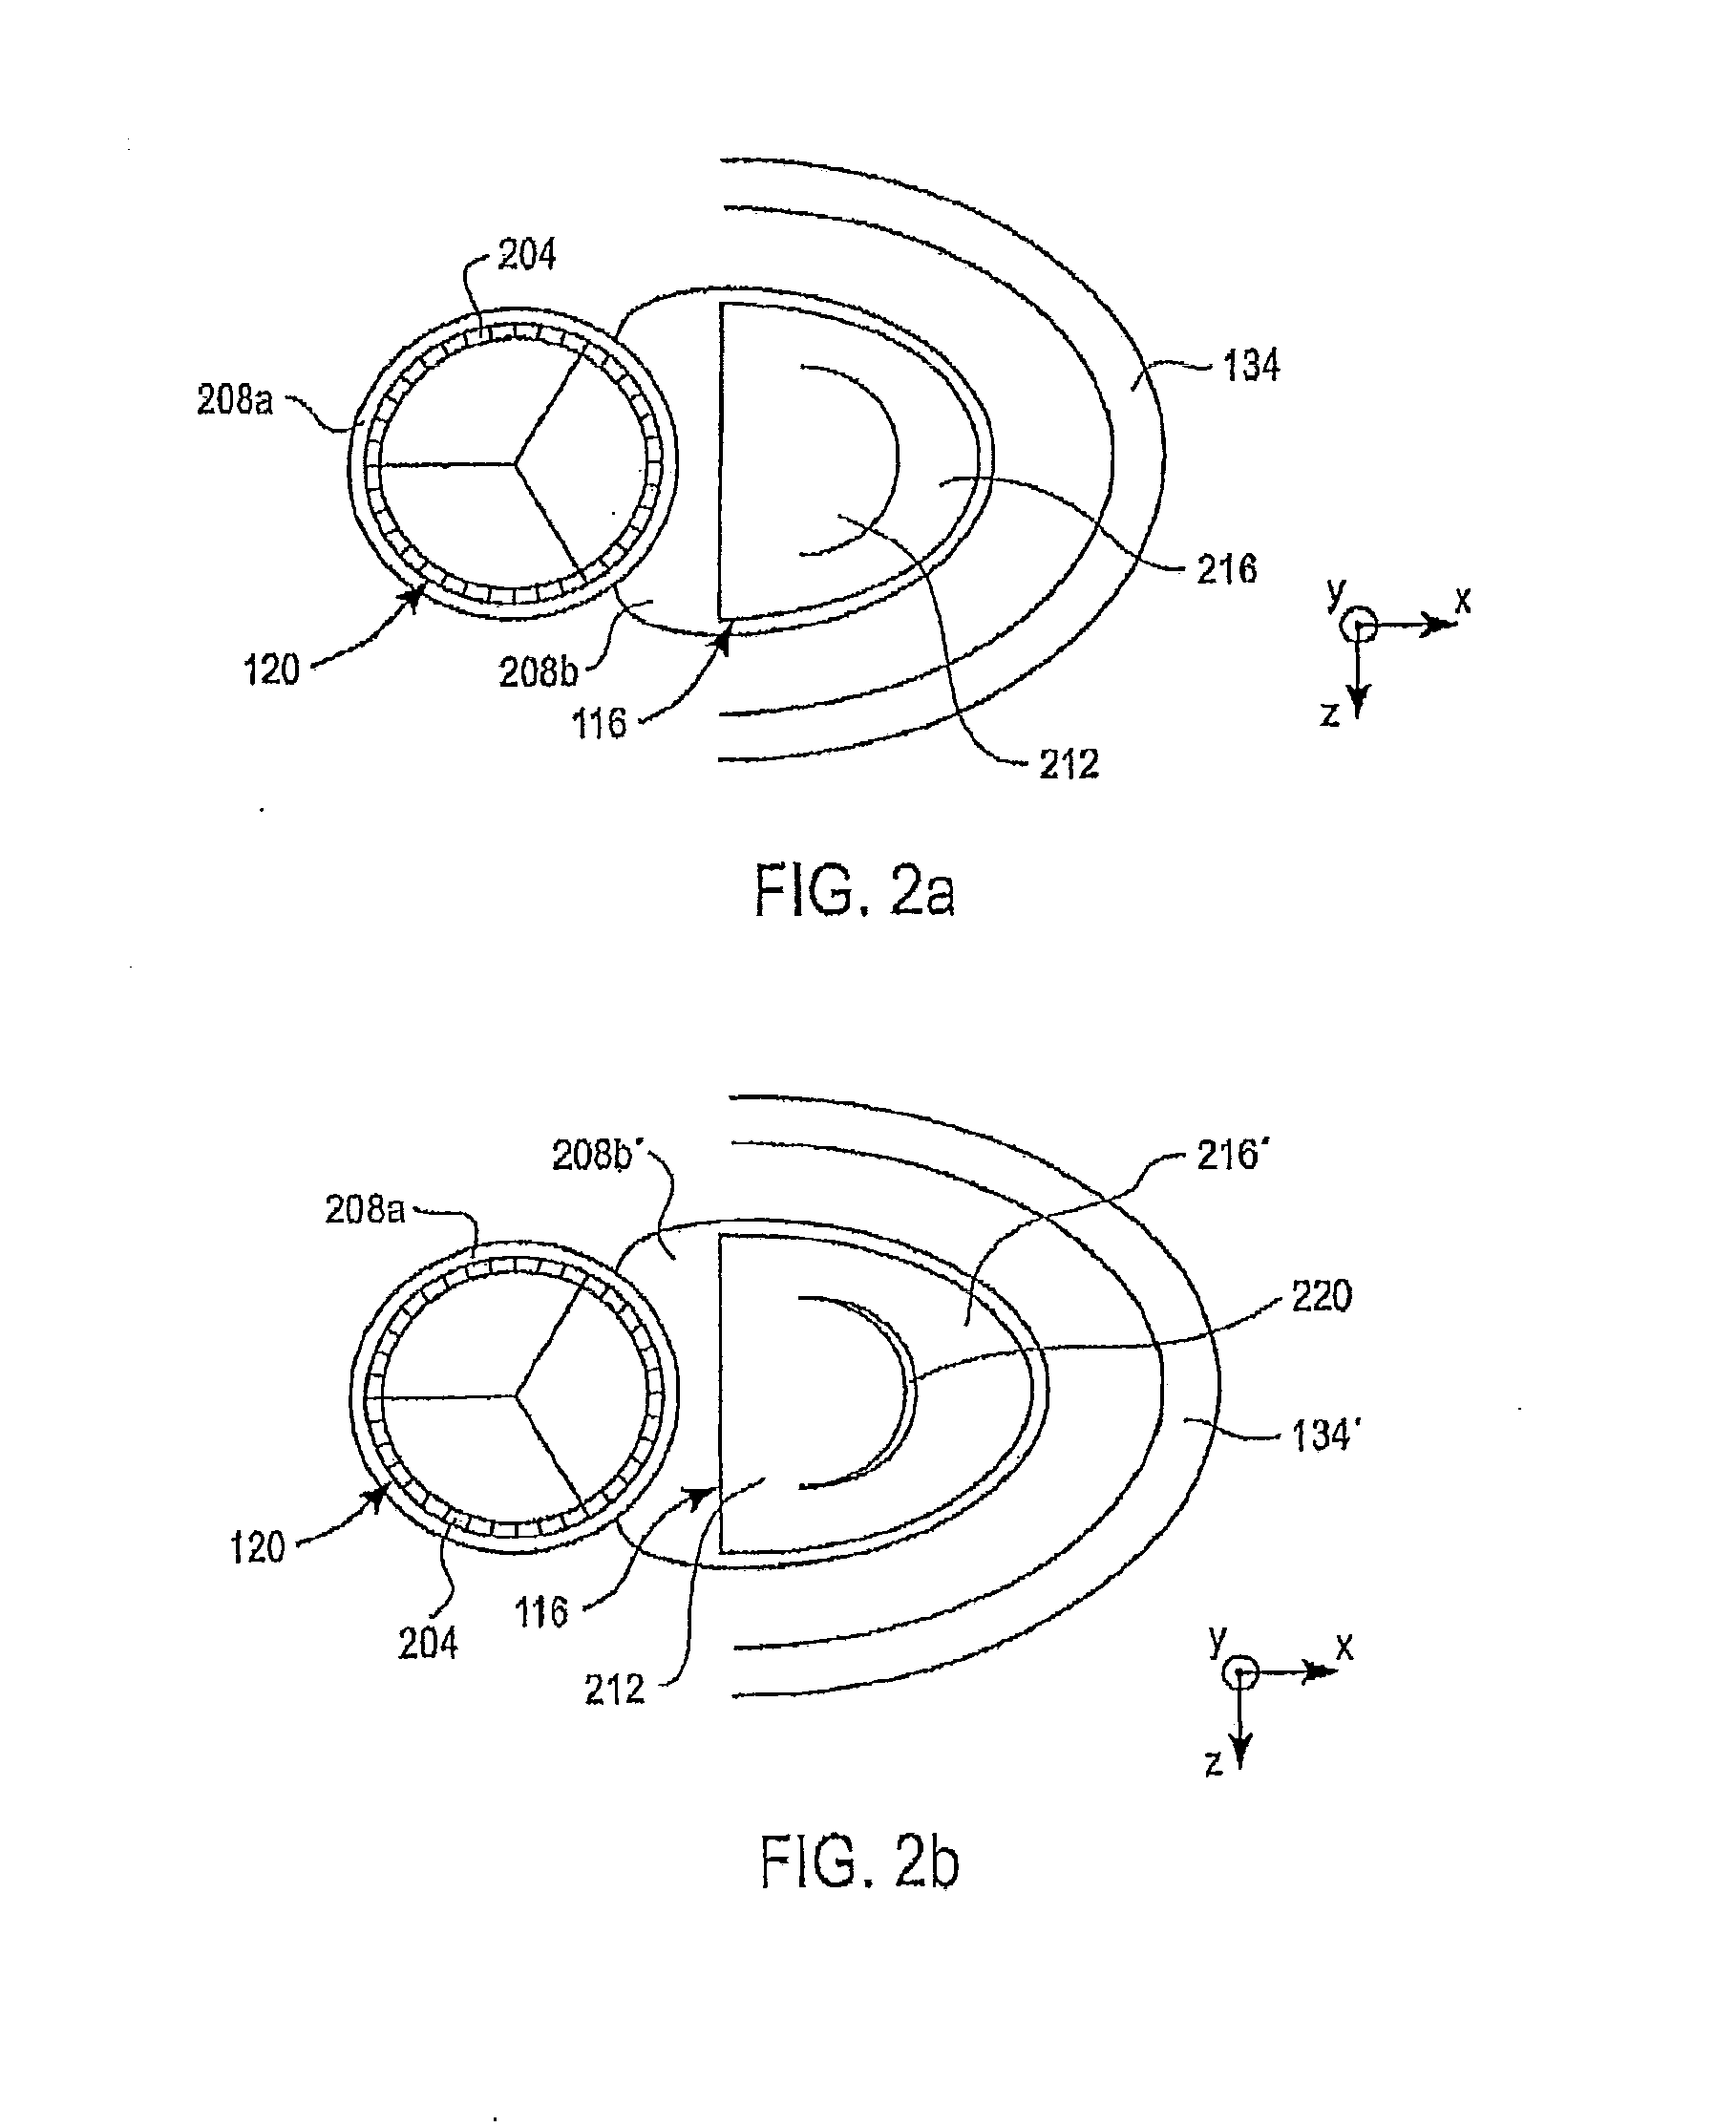 Catheter-based annuloplasty using ventricularly positioned catheter